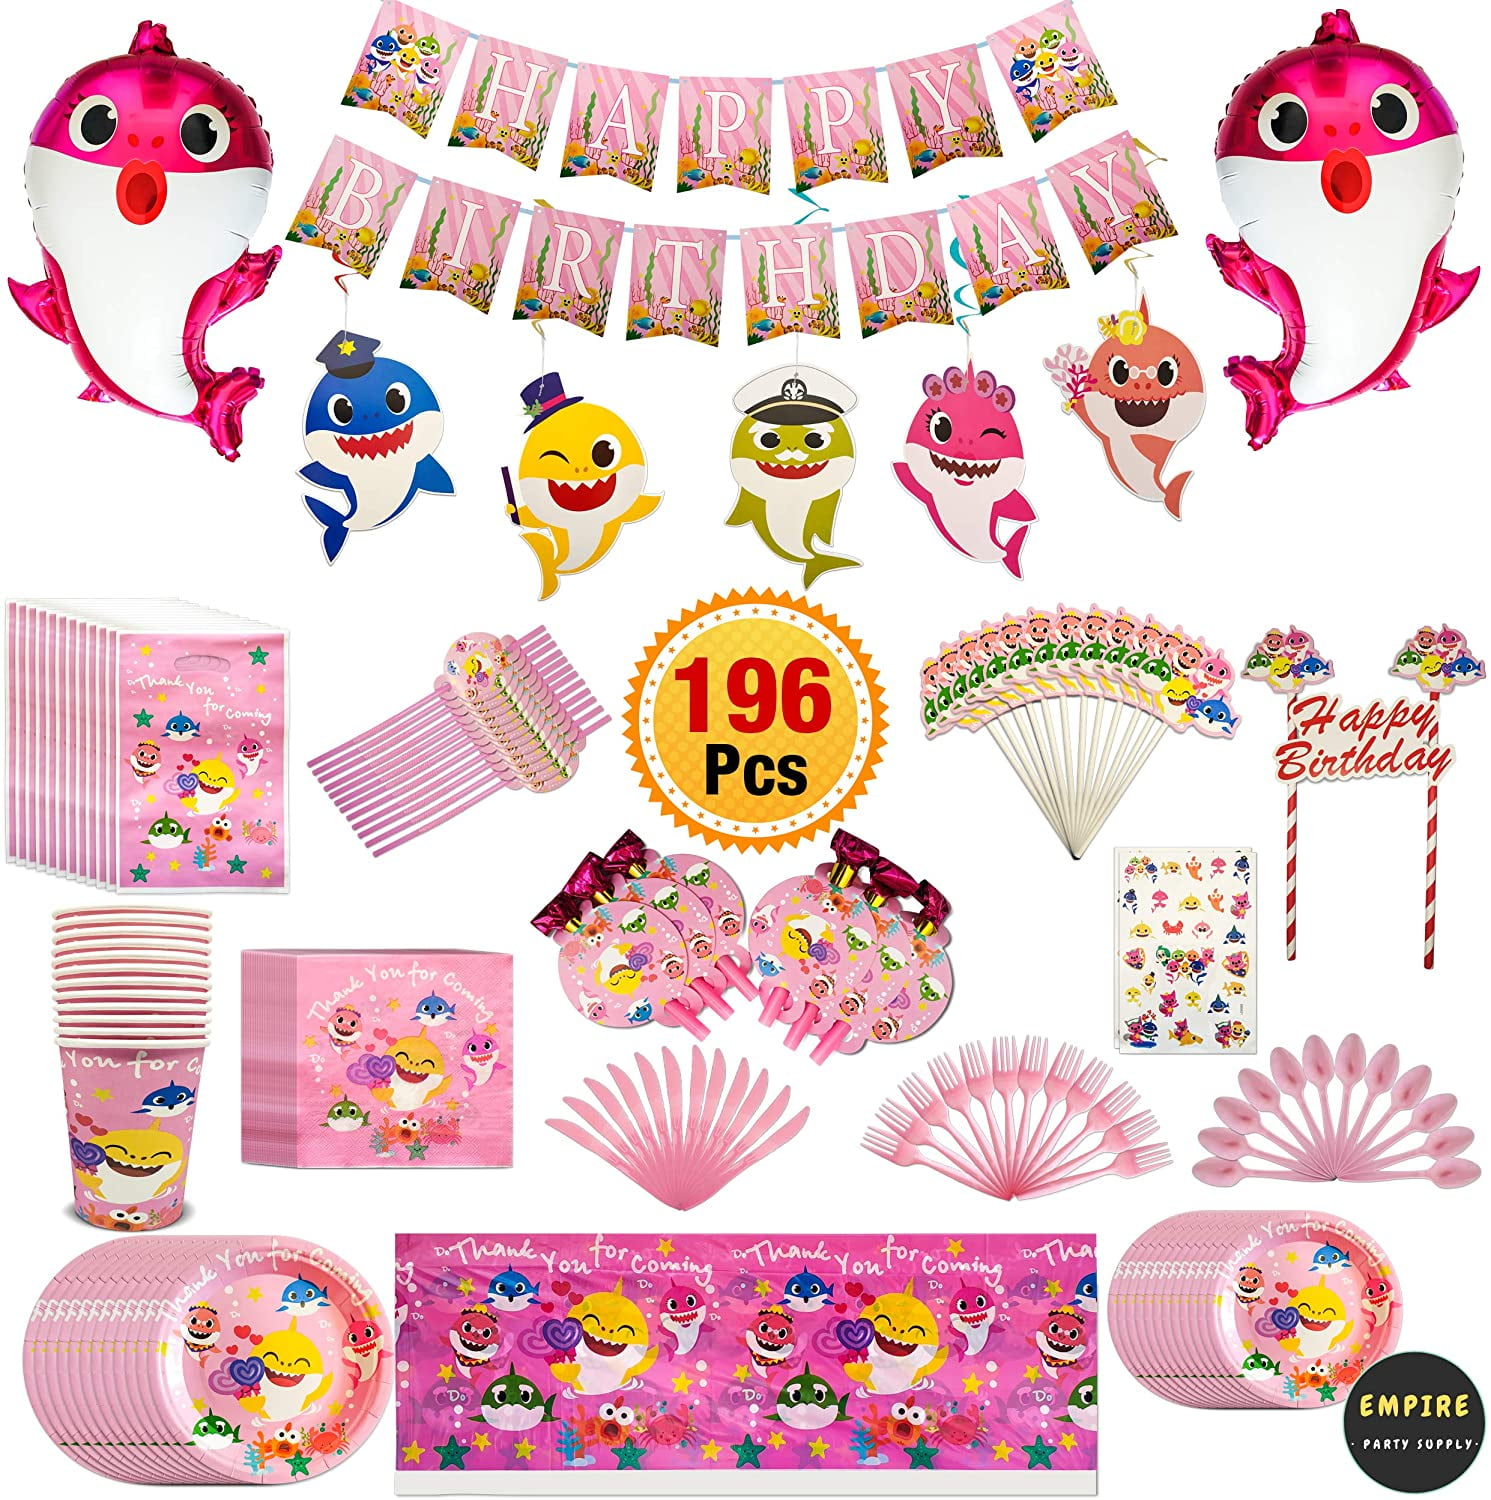 Flatware 142 Pcs Baby Cute Shark Party Favor Party Decorations Pink Theme Birthday Party Supplies Plates Knife Table Covers Straws Cups Tablecloth Birthday Party Favor Pack Set Balloon Pennant Spoons Cake Toppers Fork Banner Napkins Blowouts